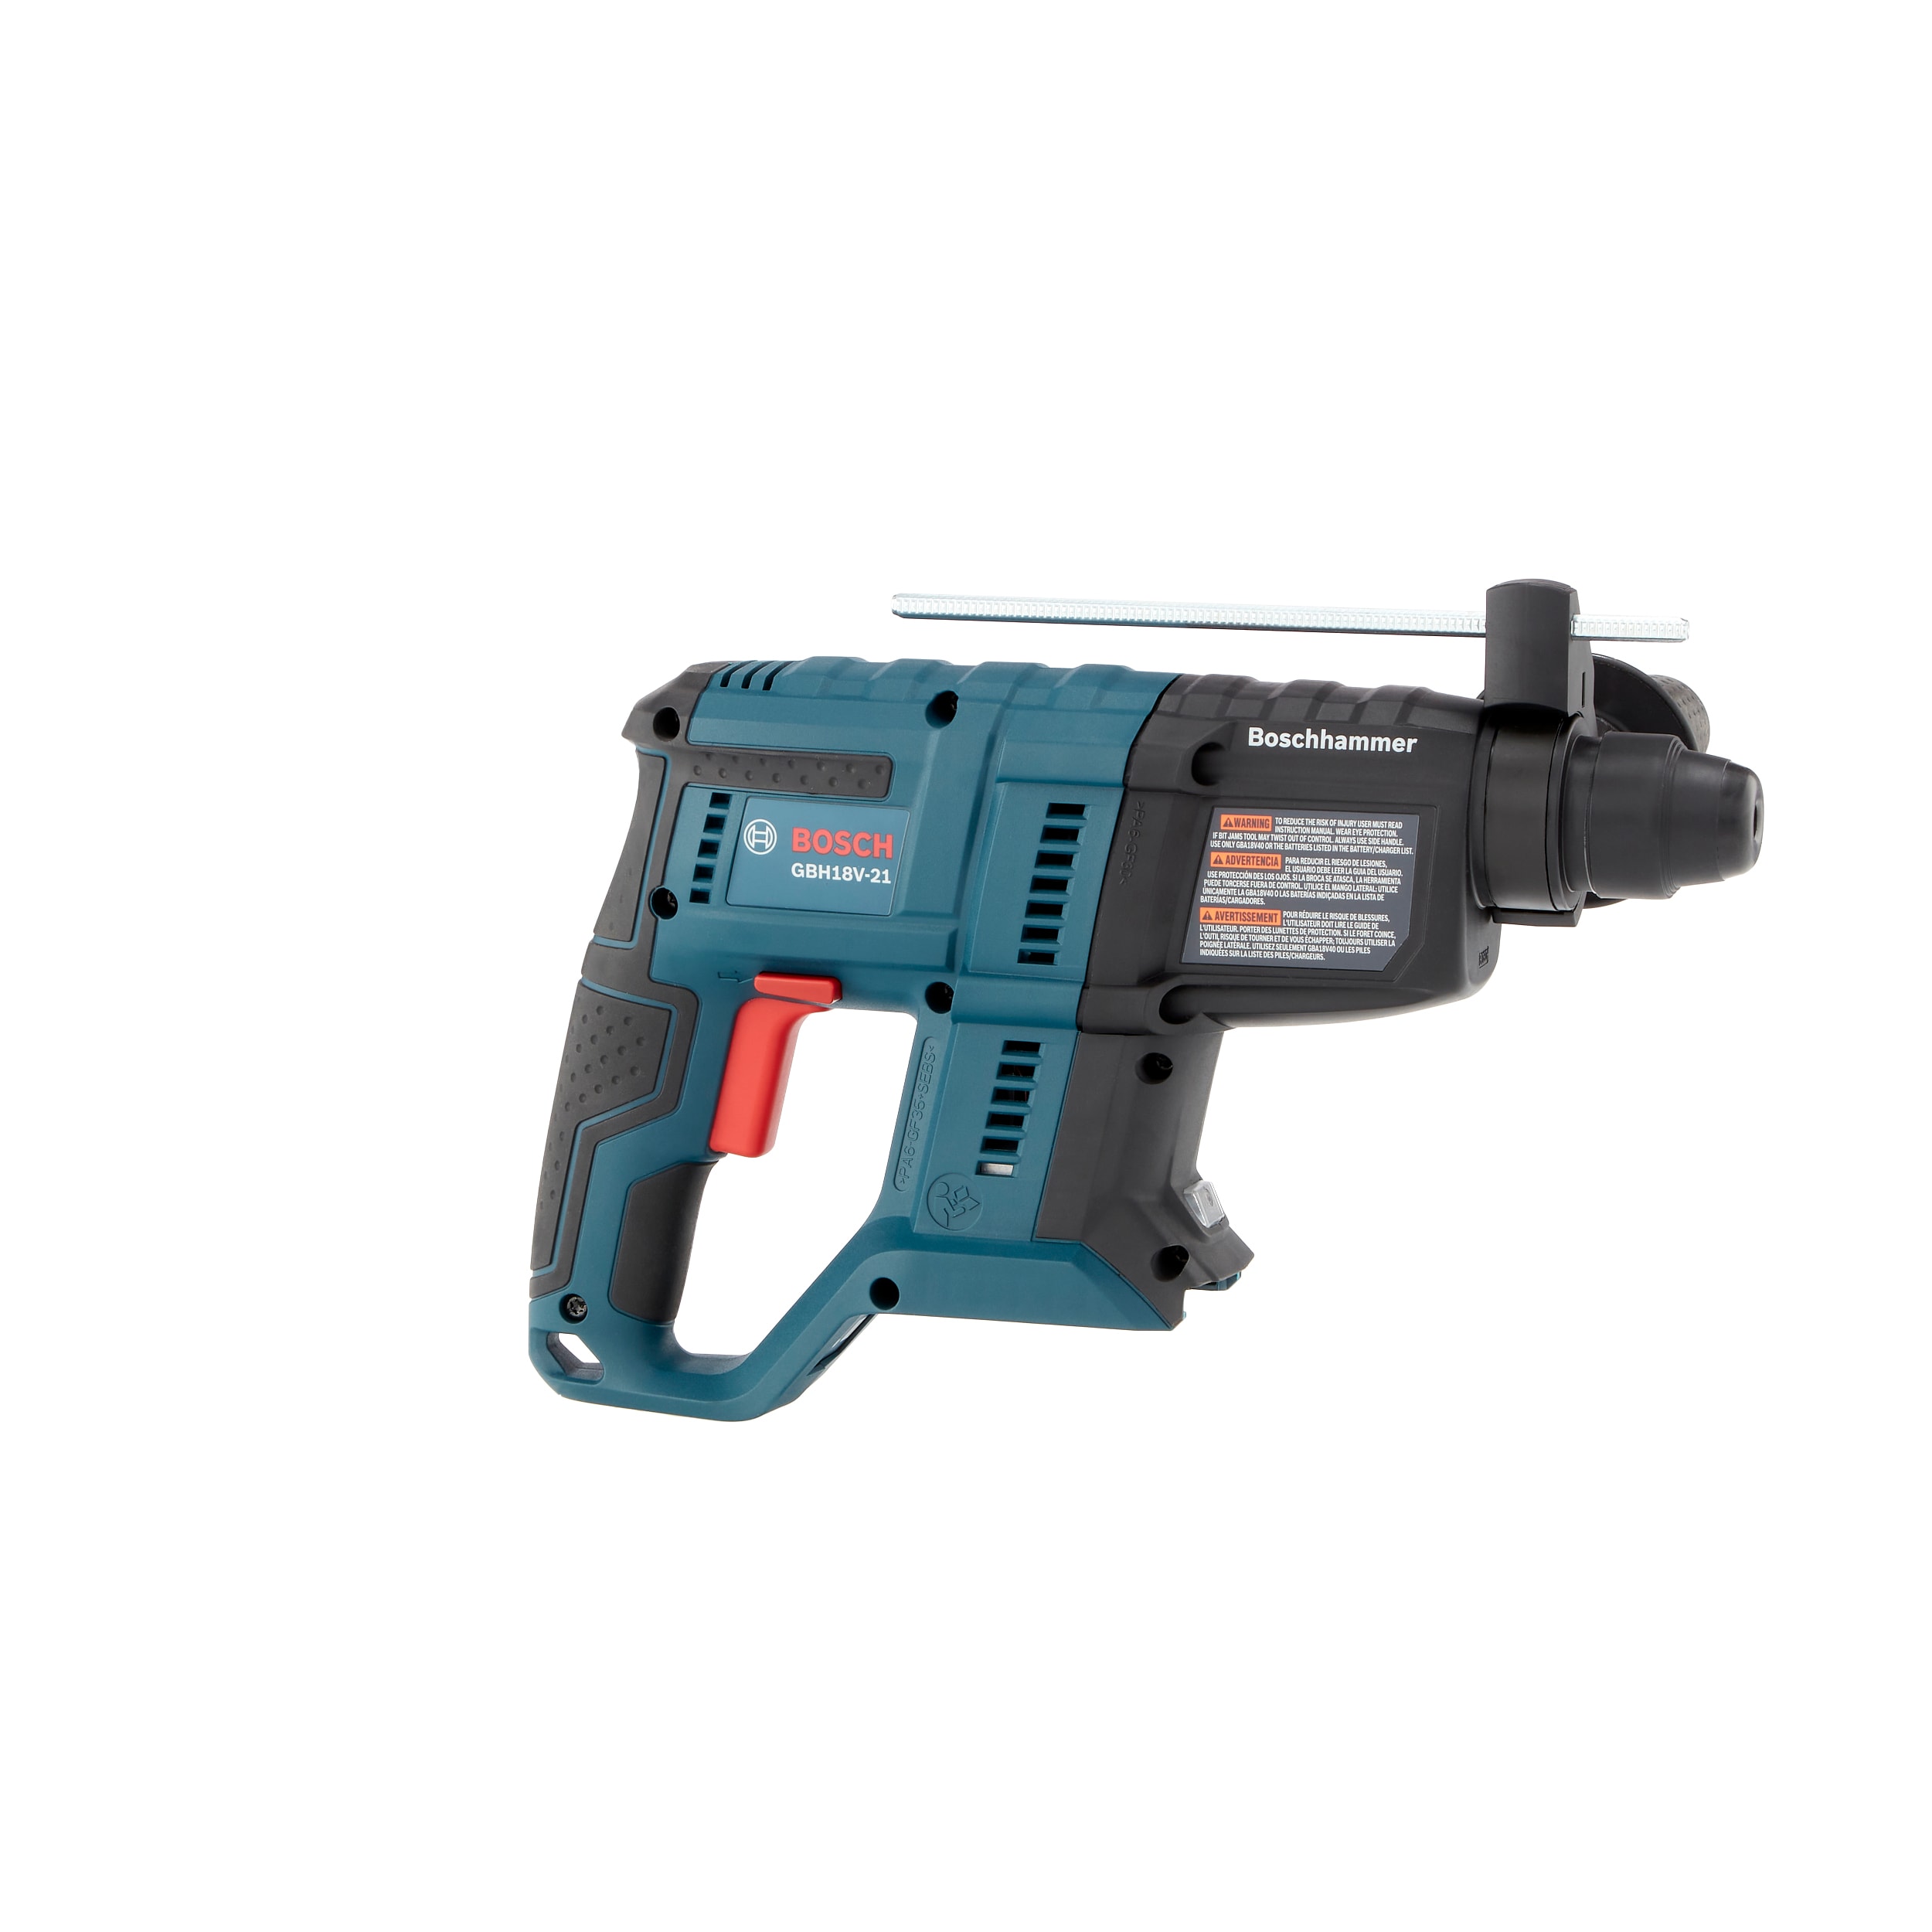 Bosch Bulldog 18-volt 3/4-in Sds-plus Speed Cordless Rotary Hammer Drill Tool) in Hammer Drills department at Lowes.com